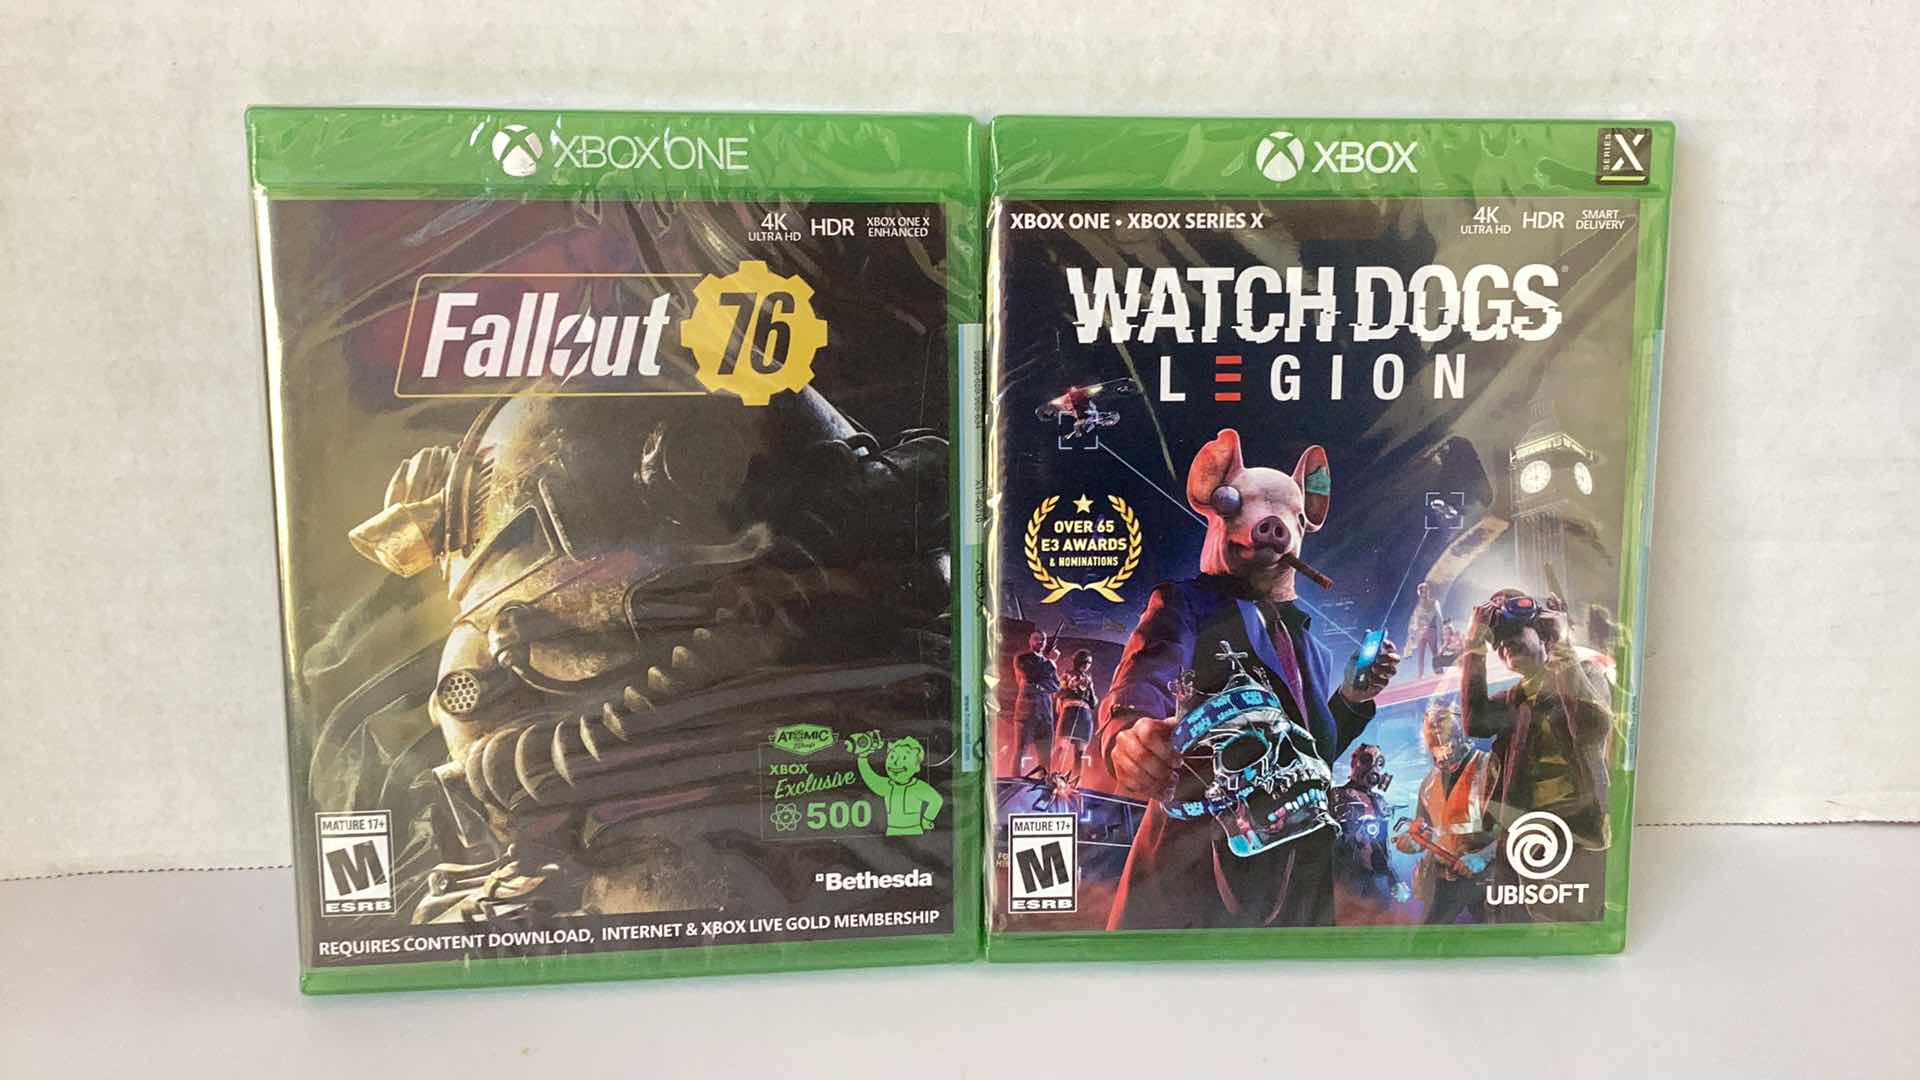 Photo 1 of 2 NEW X-BOX GAMES: FALLOUT 76 AND WATCH DOGS LEGION